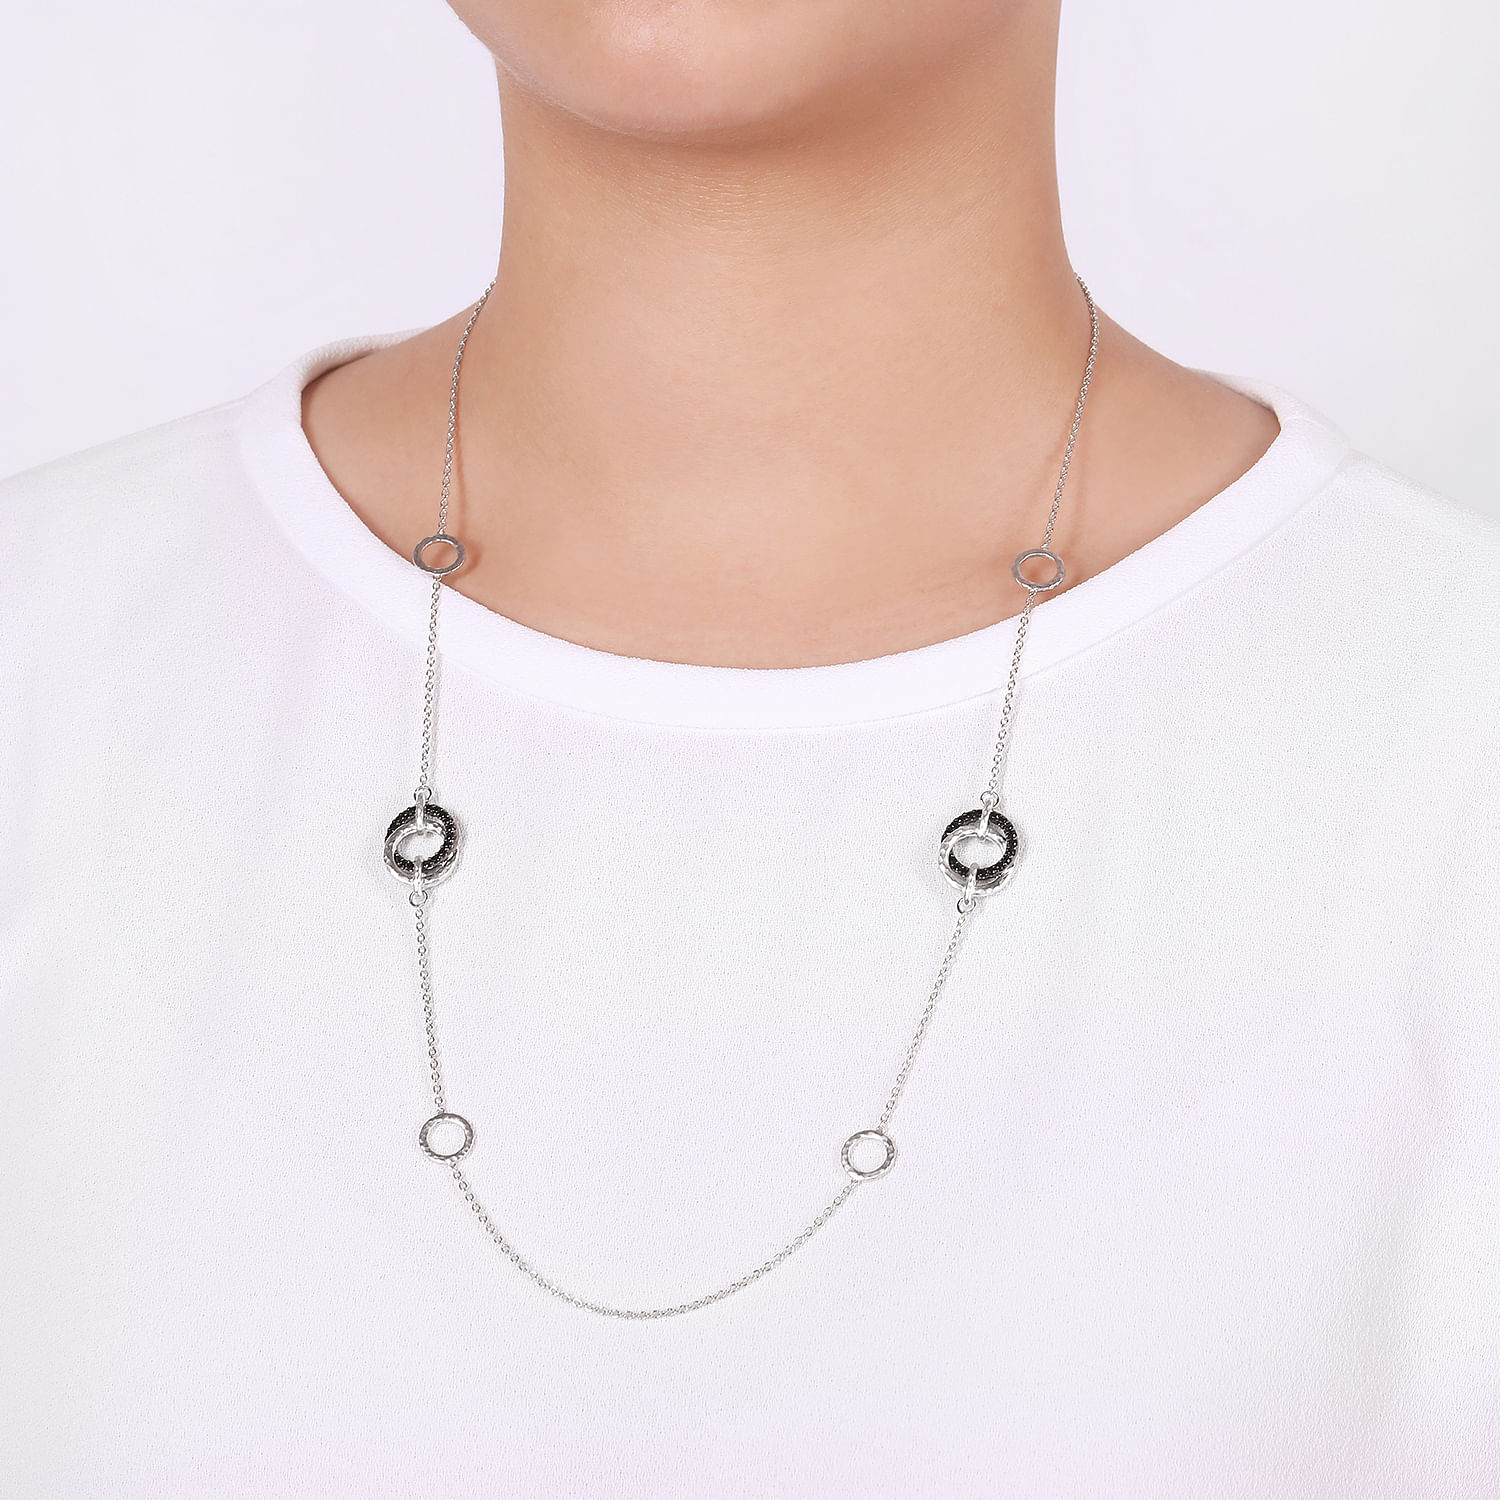 25 inch 925 Sterling Silver Necklace with Black Spinel and Hammered Circle Stations